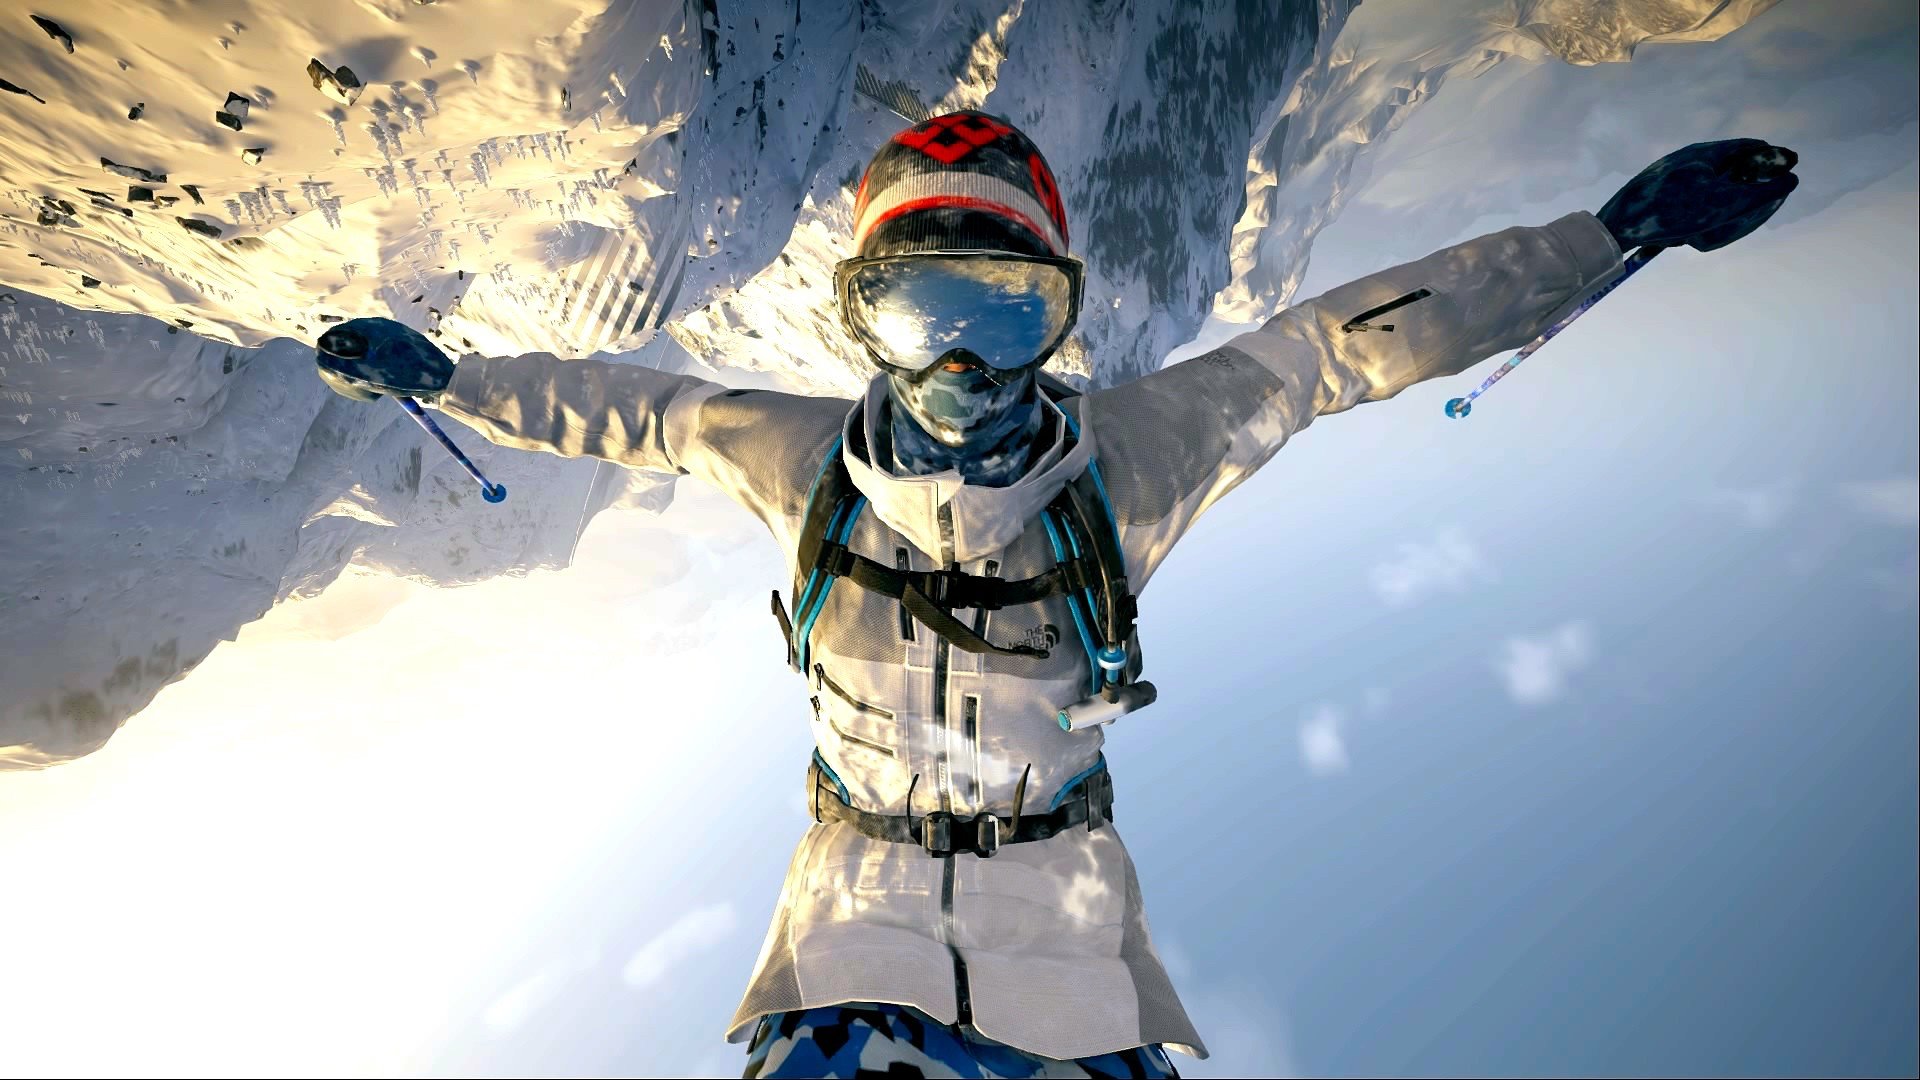 skiers, Steep, PlayStation 4, Backflip, Snow, Upside down, Goggles, Video games, Mountains Wallpaper